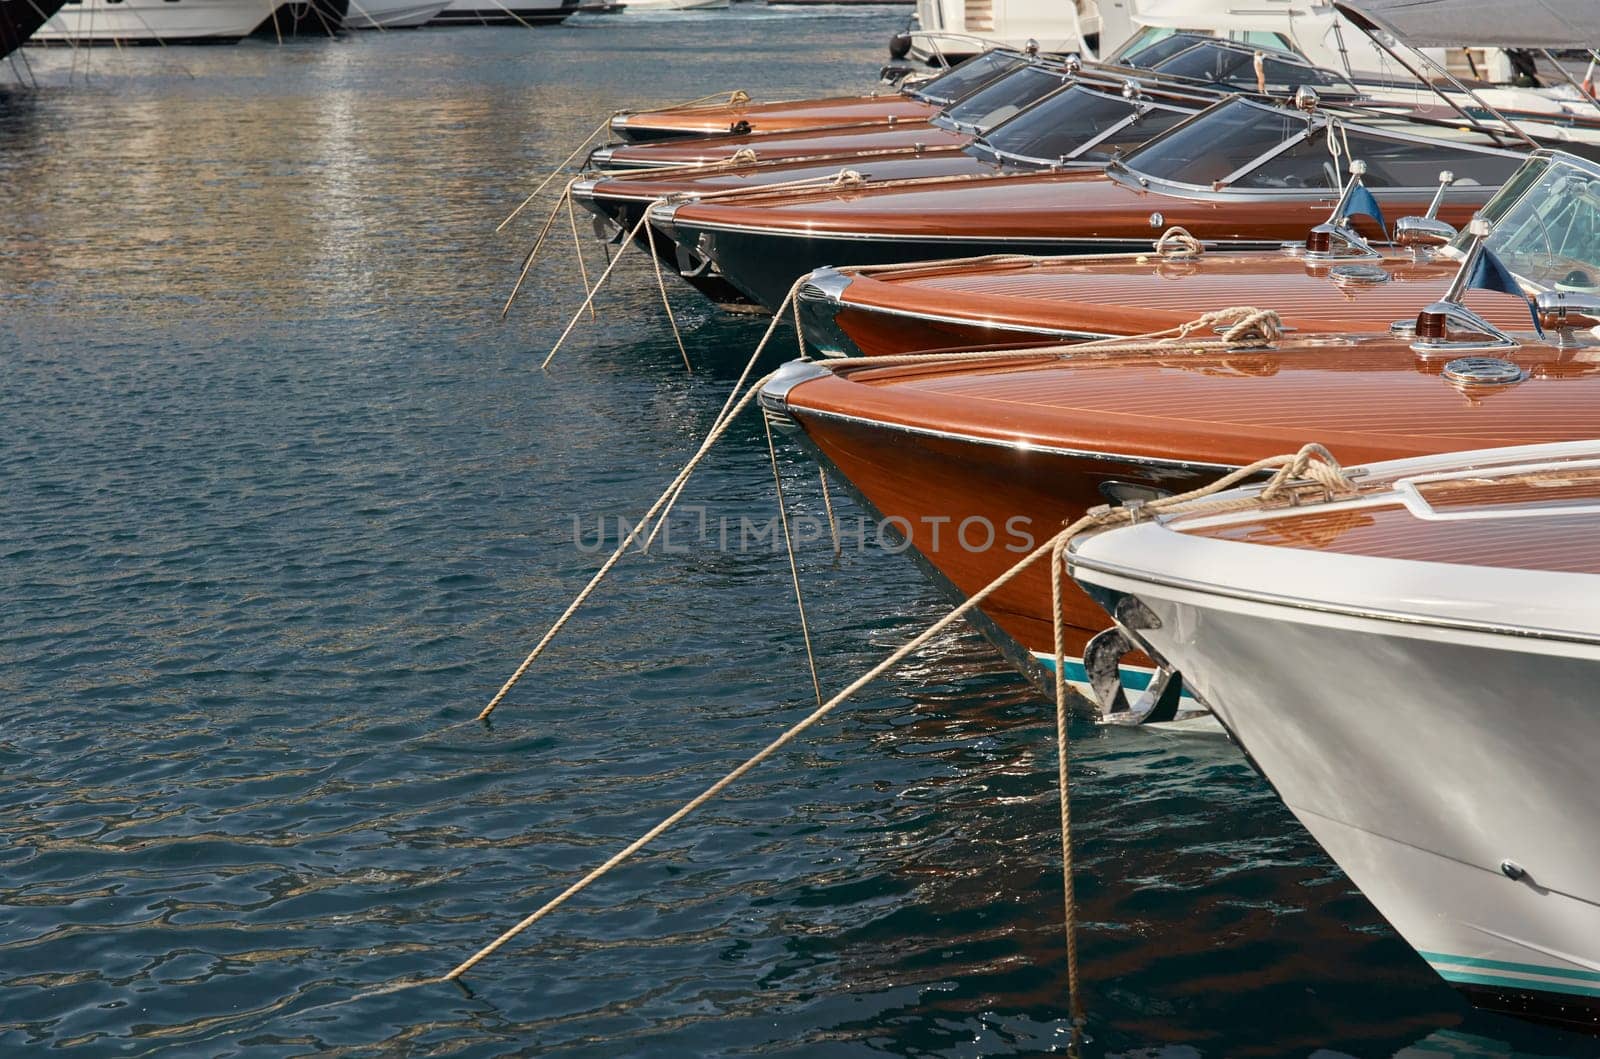 Few luxury retro motor boats in row at the famous motorboat exhibition in the principality of Monaco, Monte Carlo, the most expensive boats for the richest people, boats for rich clients